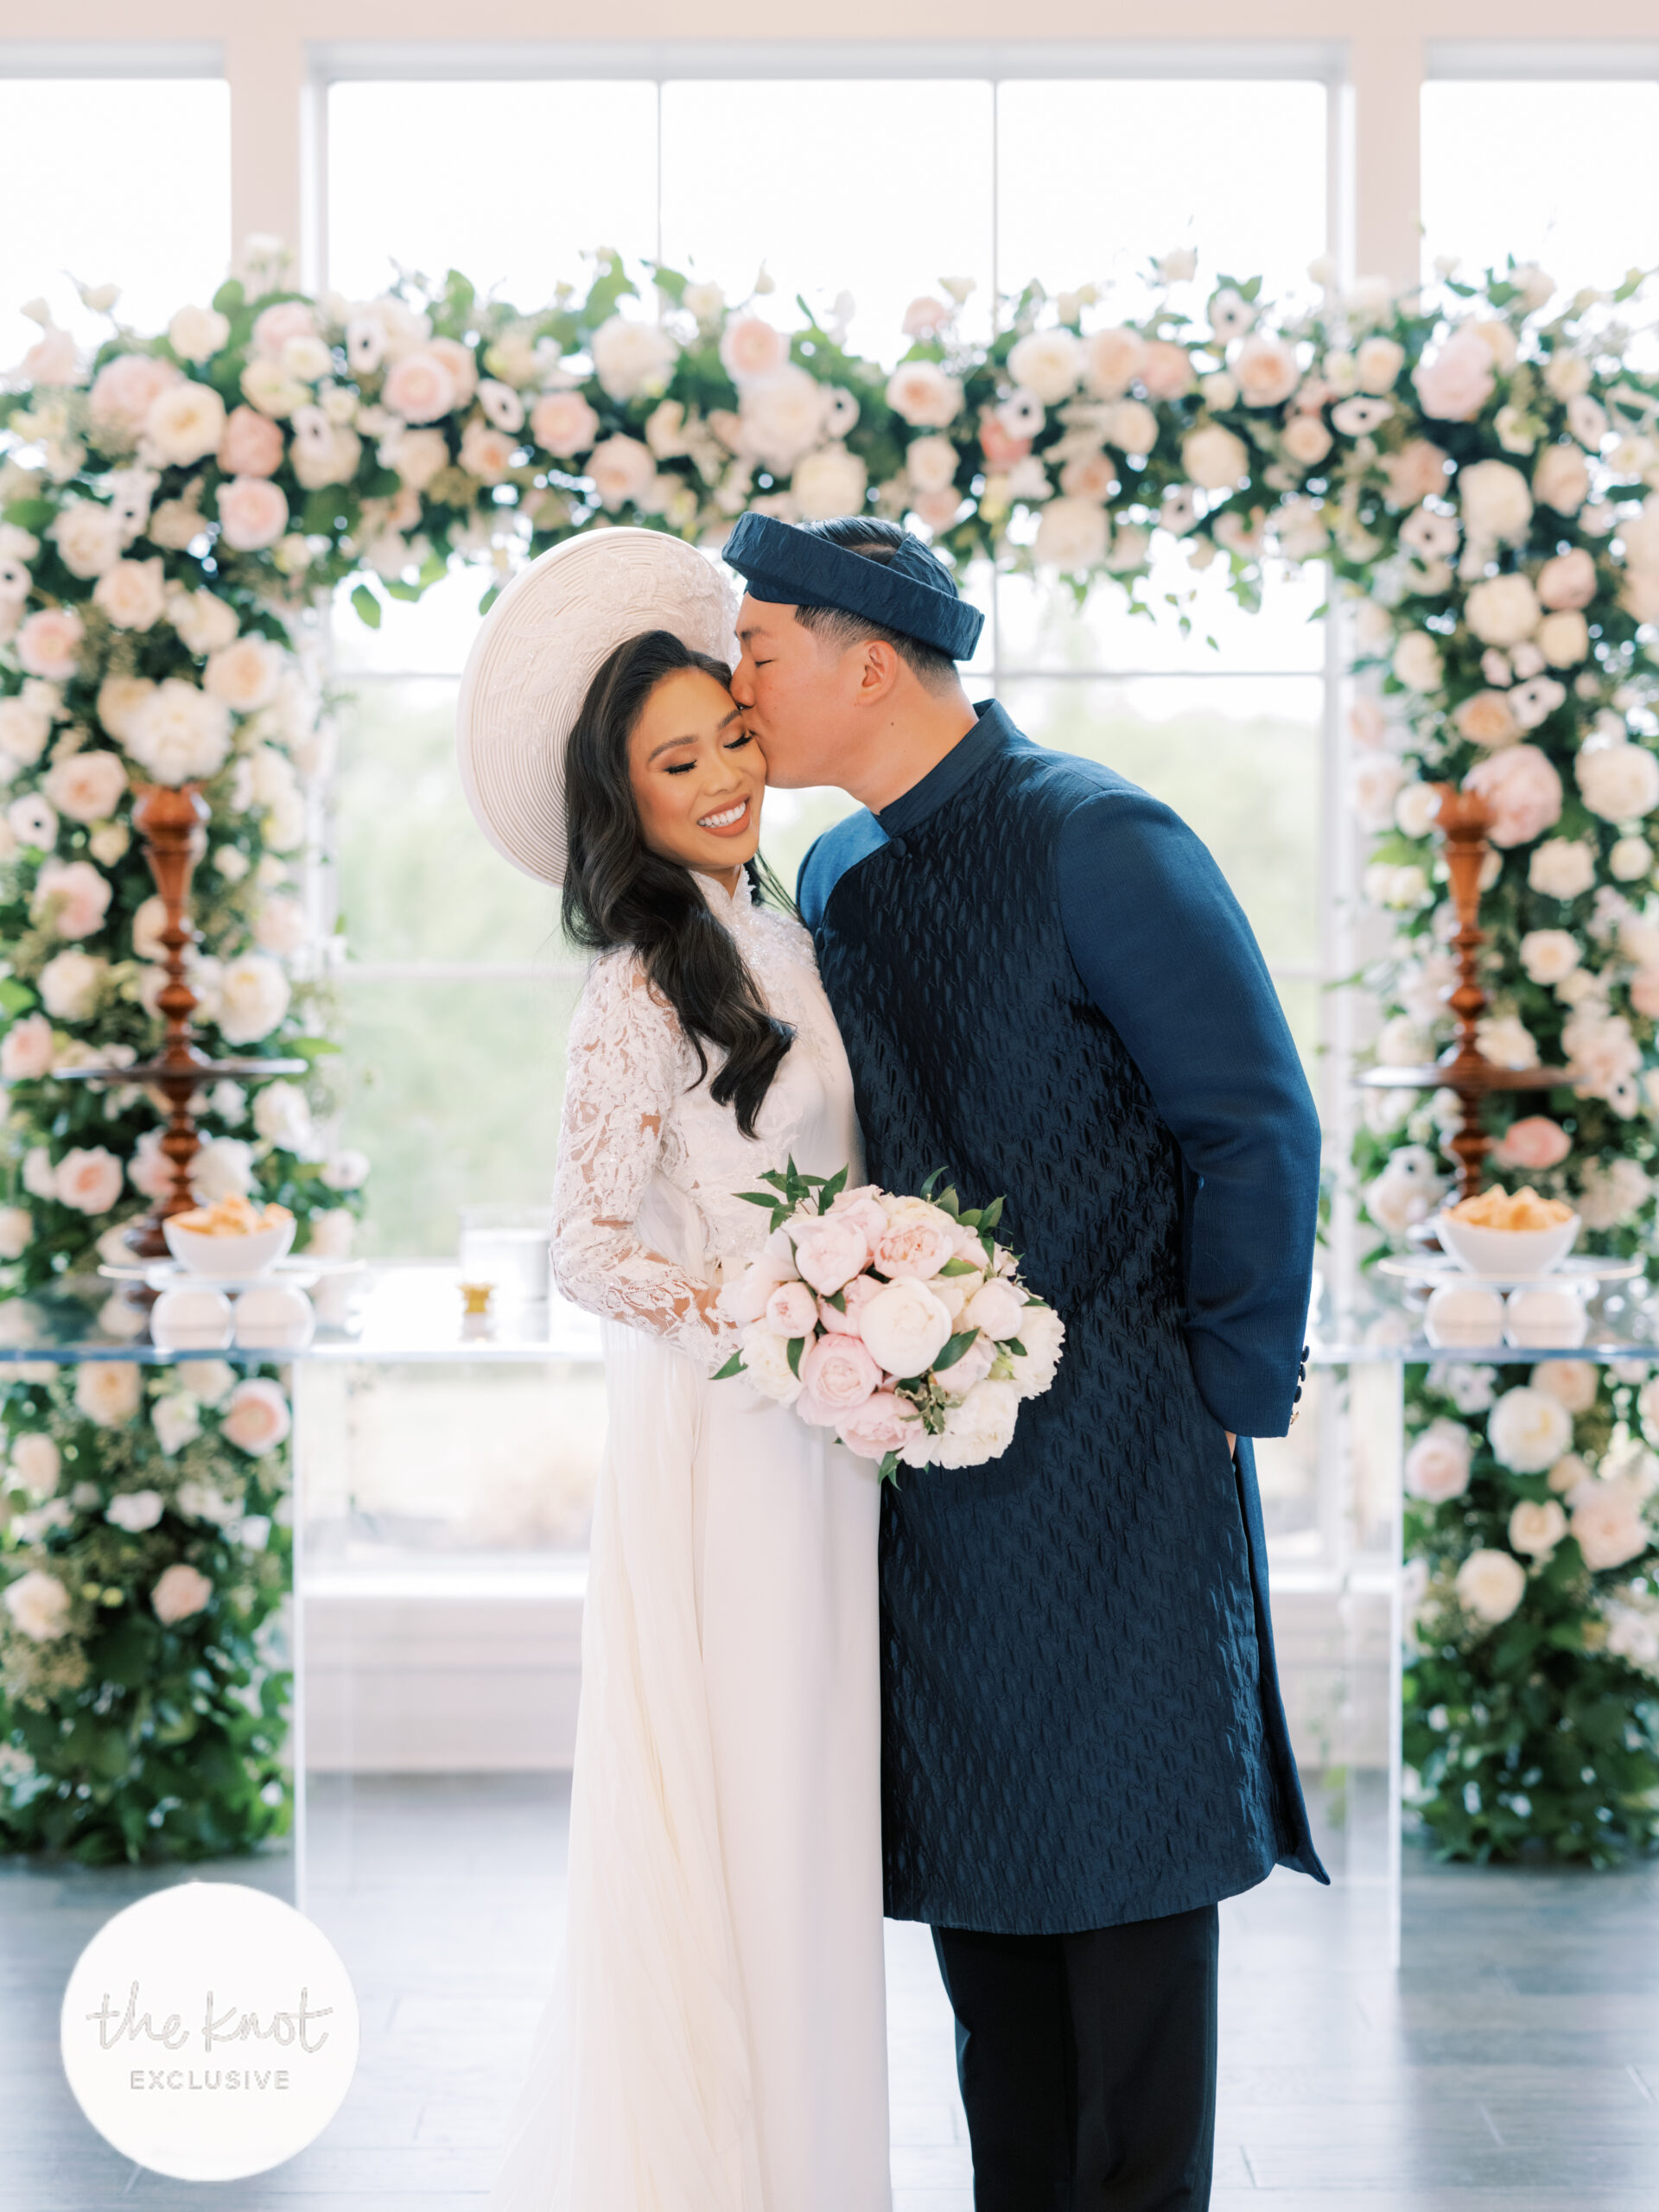 Hoang-Kim Cung and her husband, Jonathan Van on their wedding day wearing Thai Nguyen Atelier wedding ao dai at the Hillside Estate with floral arch and pink peonies bouquet